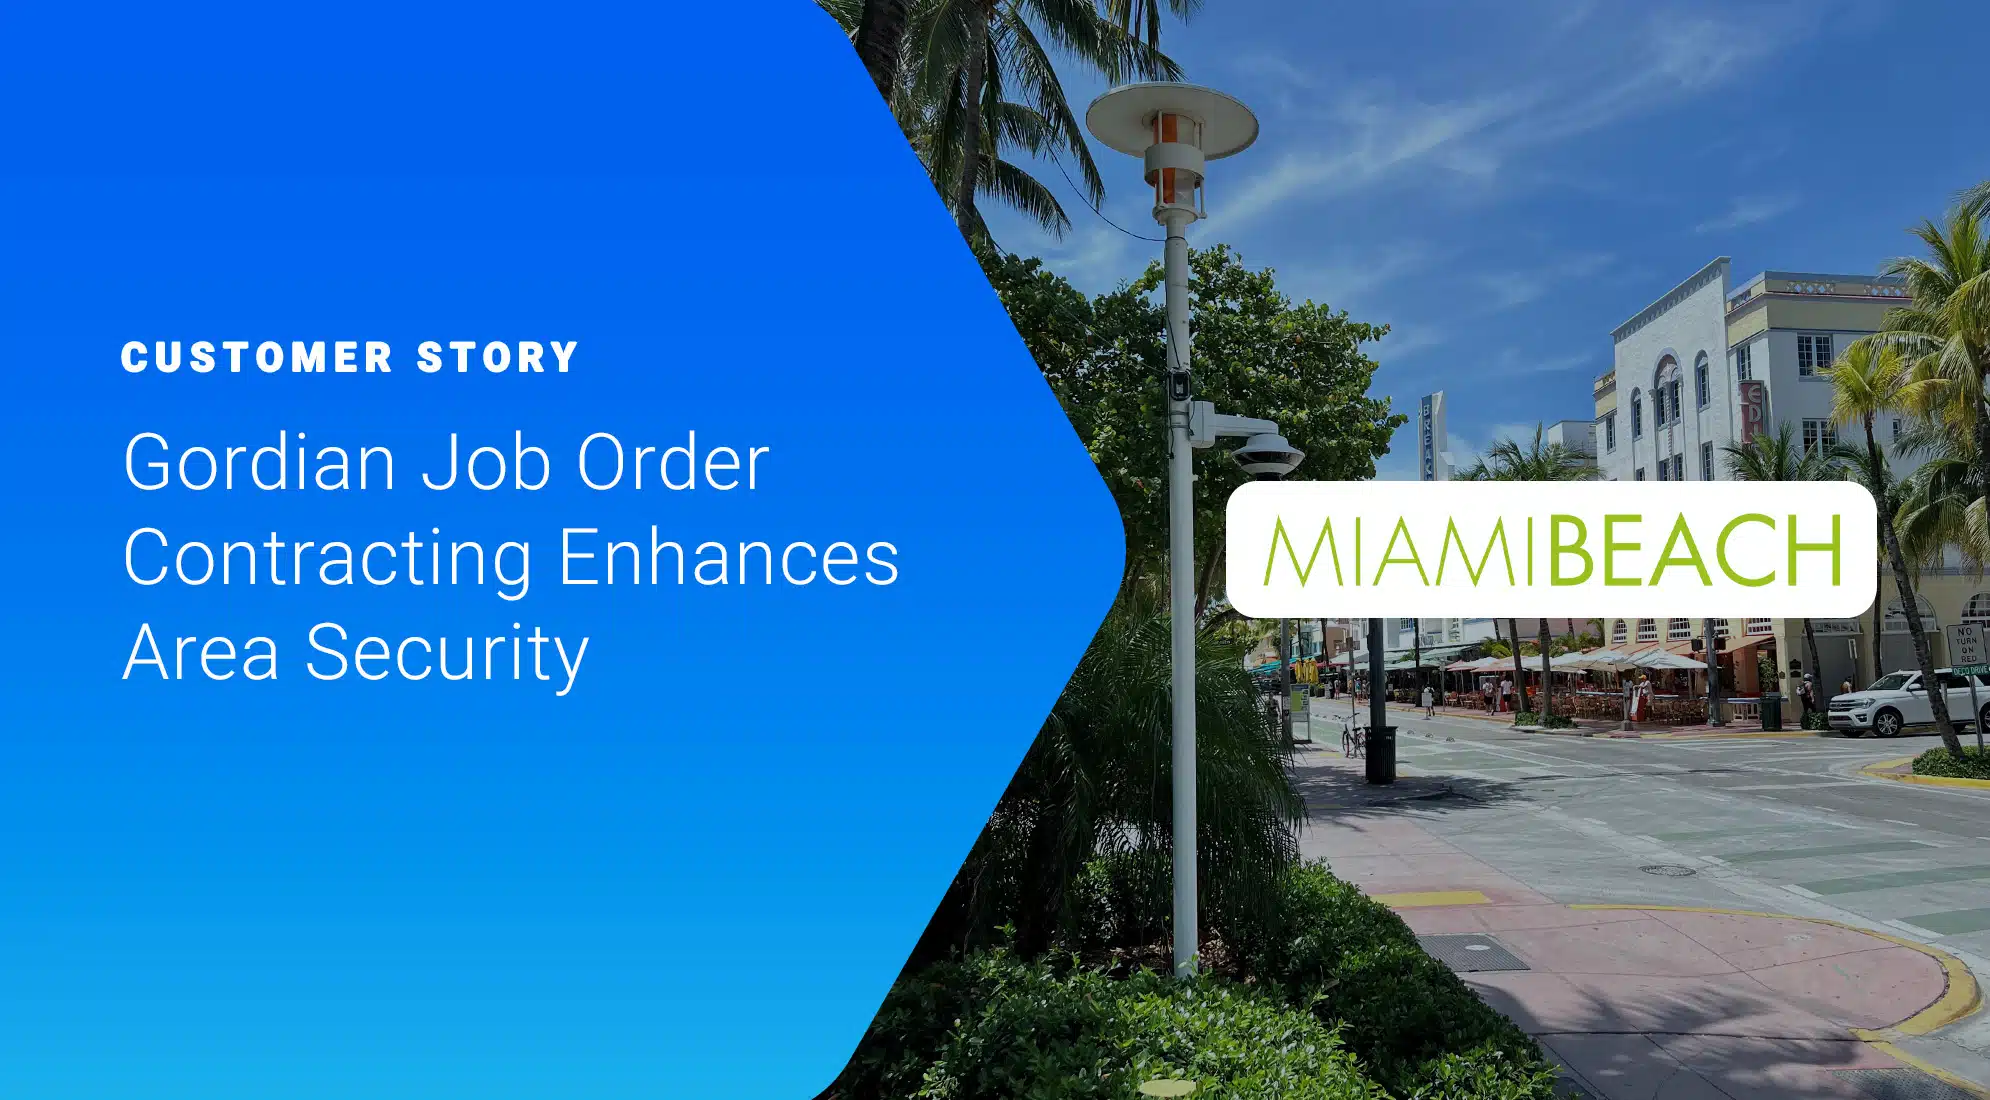 Miami Beach Completes Public Safety Project 1